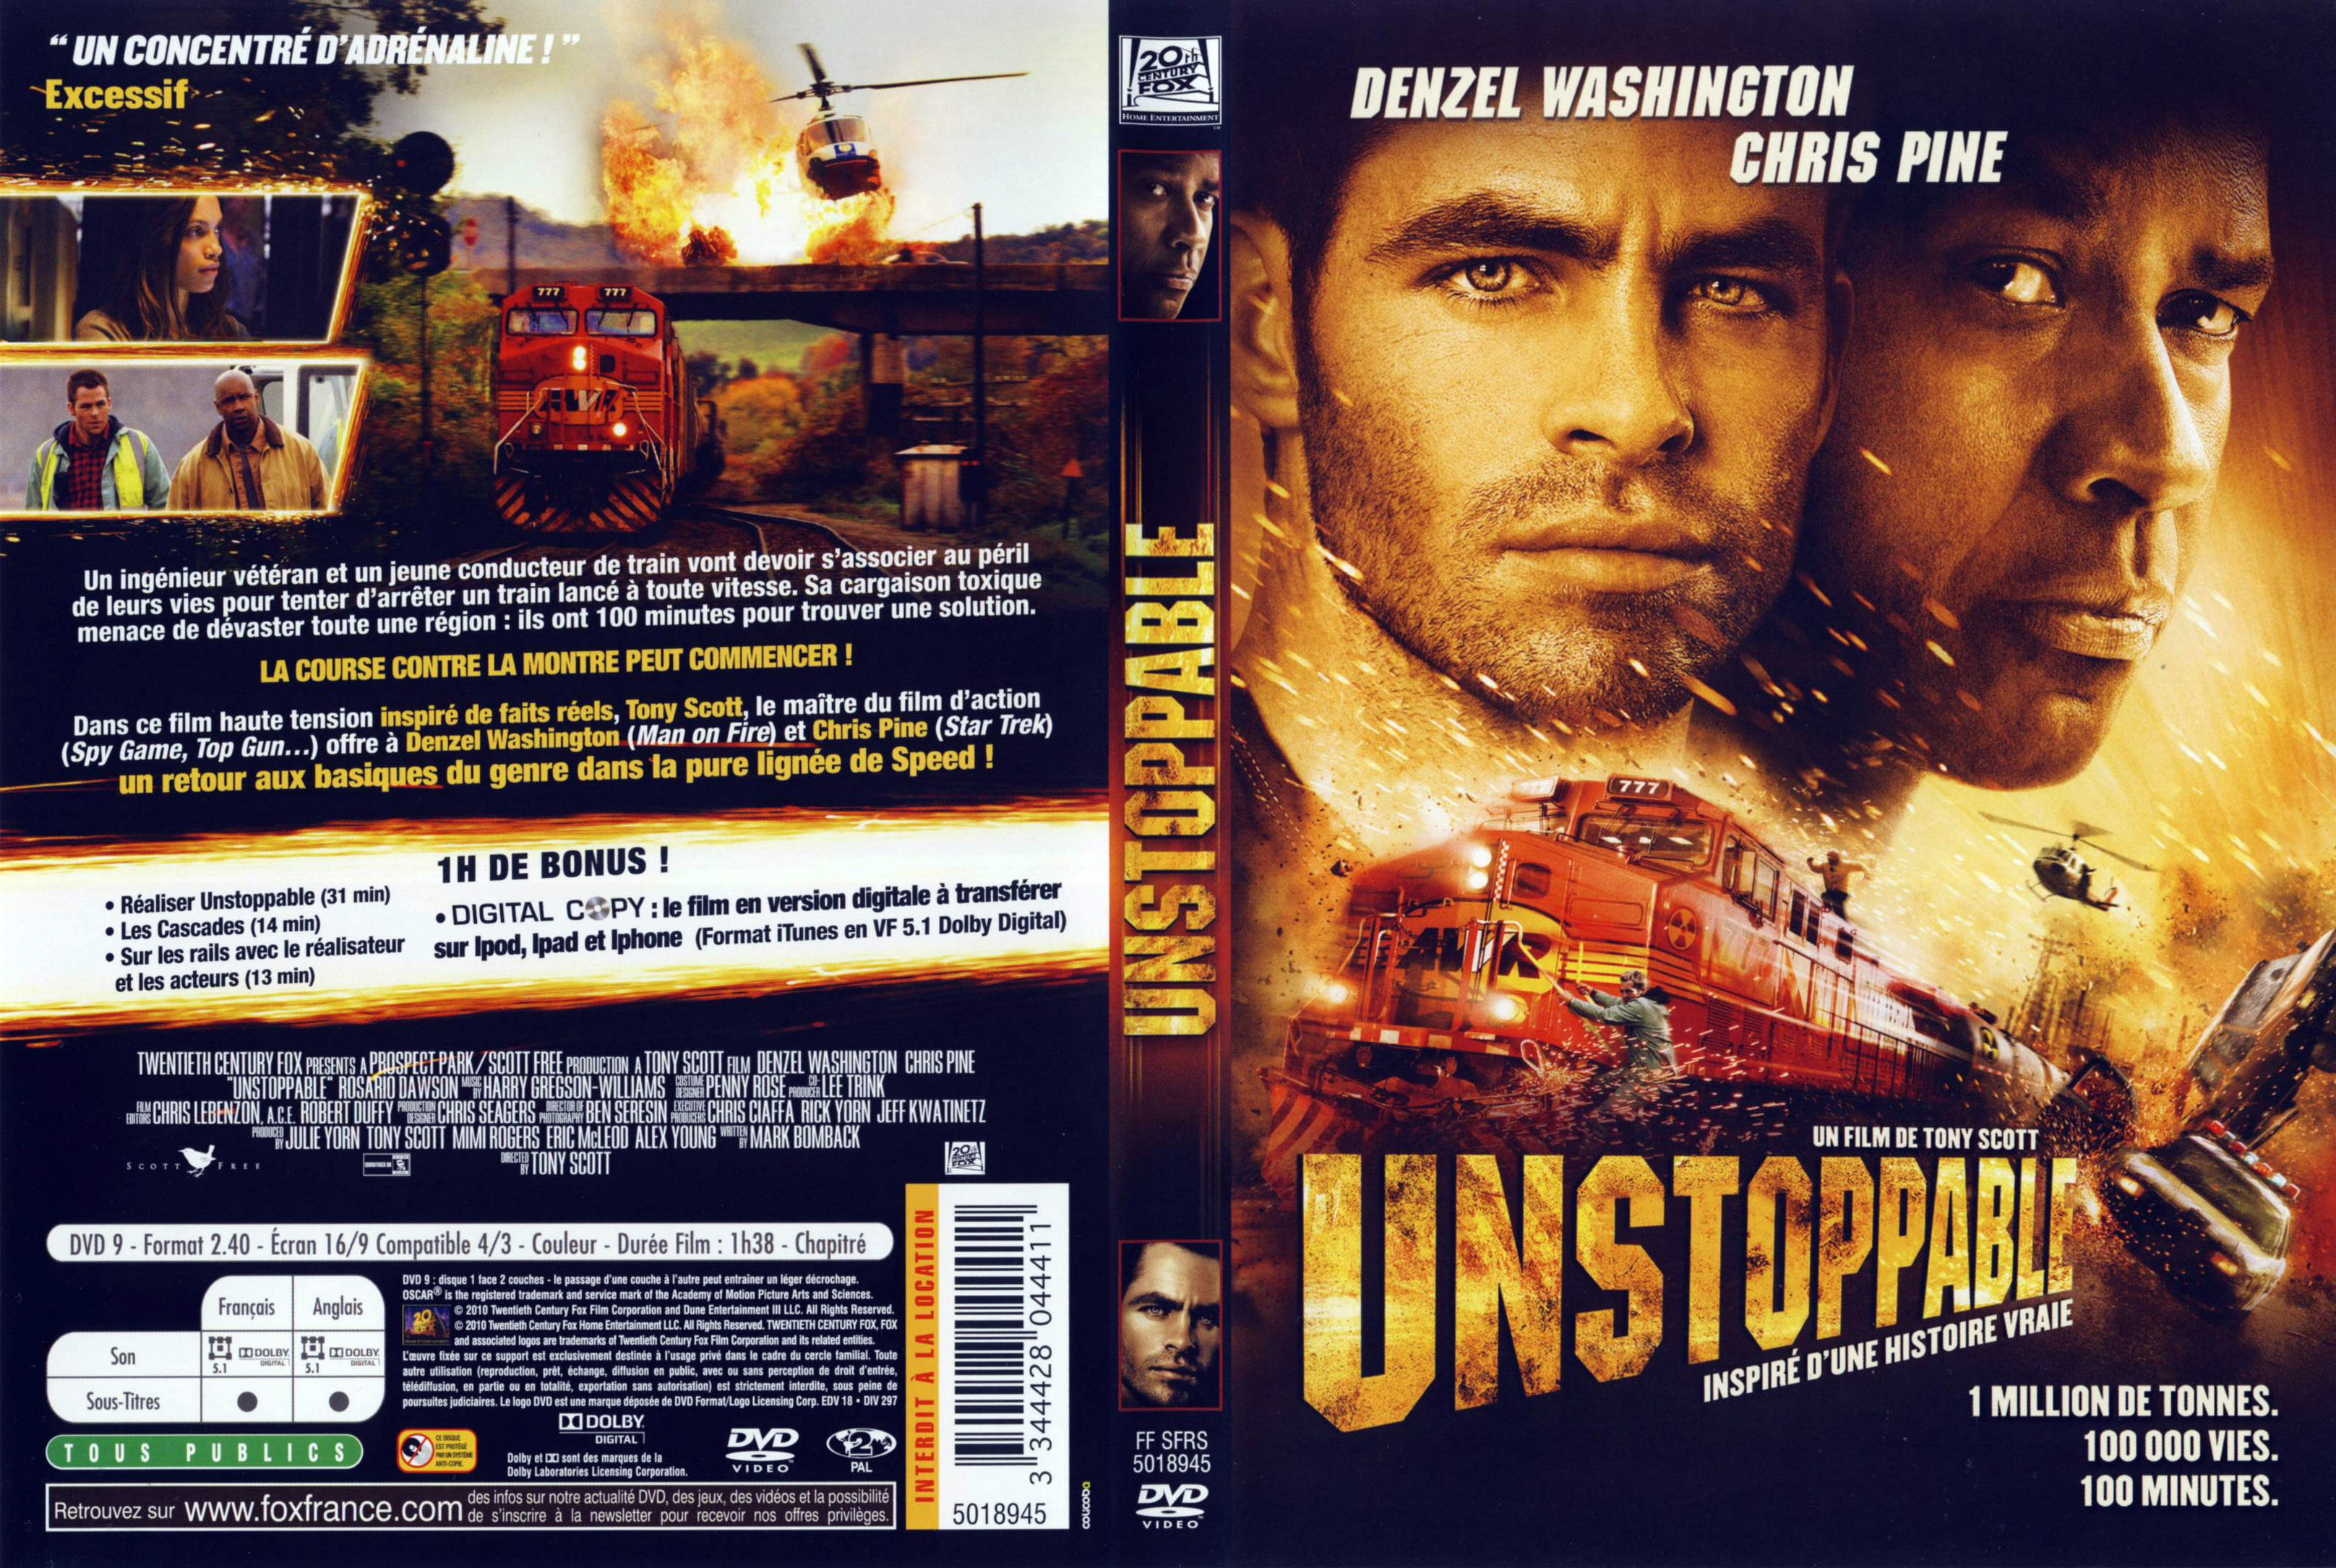 Jaquette DVD Unstoppable